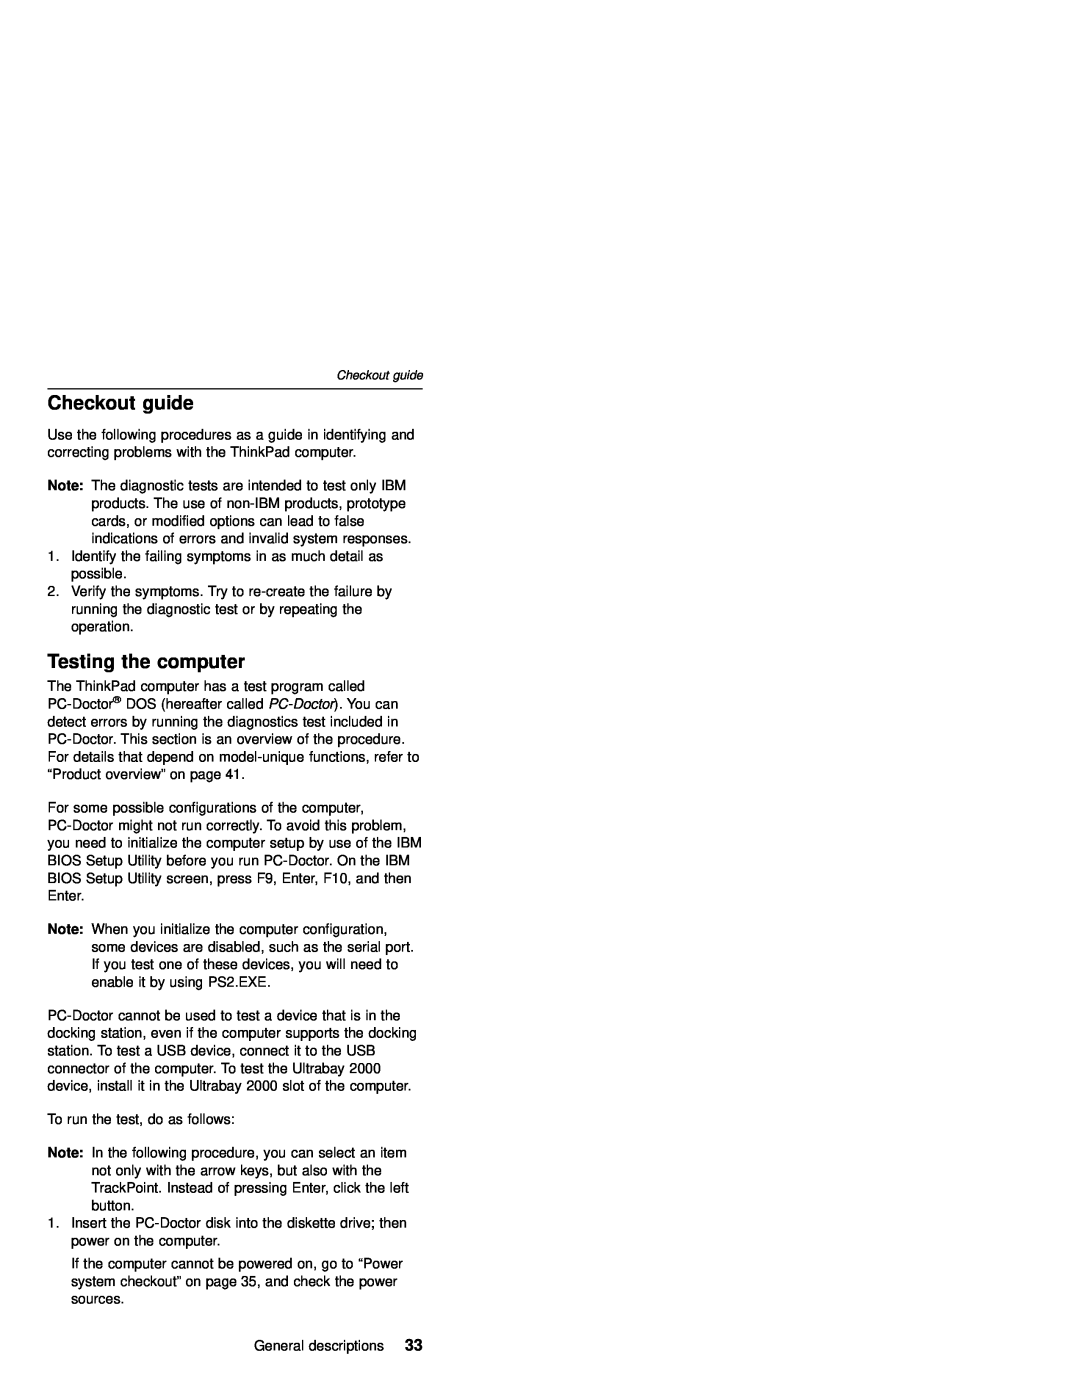 IBM A21P, A21M, A22P, A22M, A20M, MT 2631 manual Checkout guide, Testing the computer 